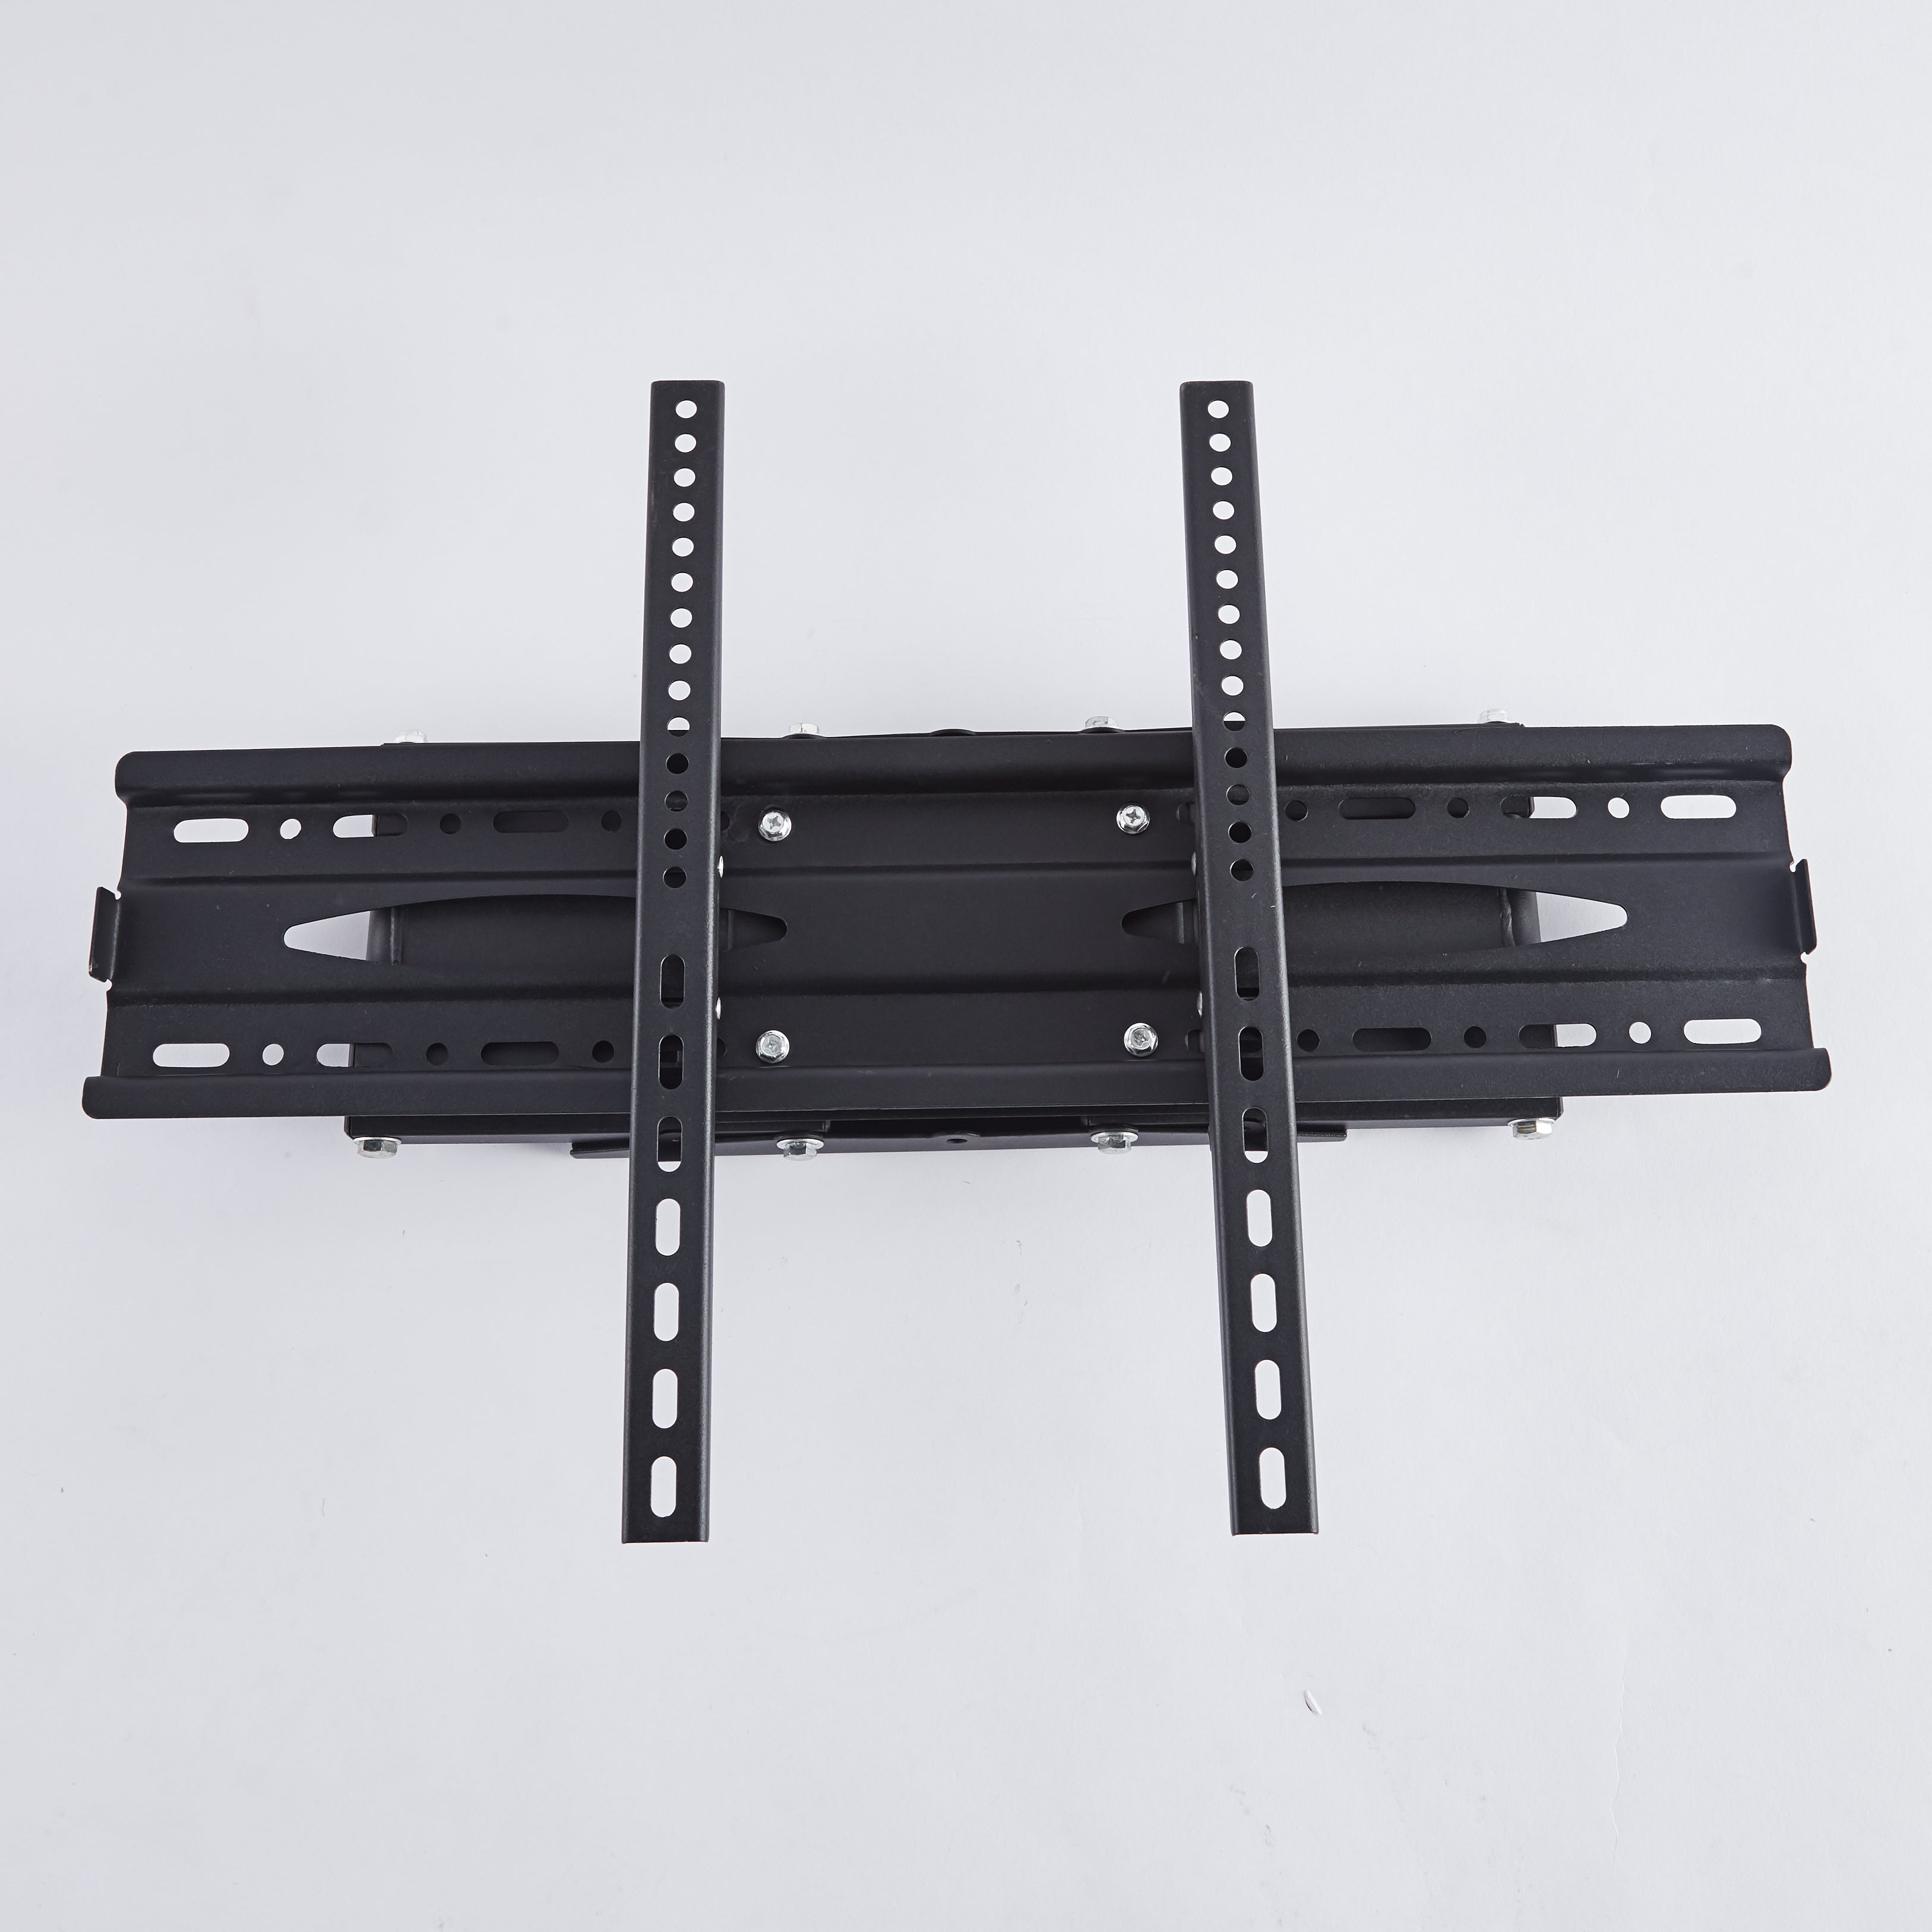 Fixed Wall Bracket Double Arm for 32-inch to 70-inch TVs4